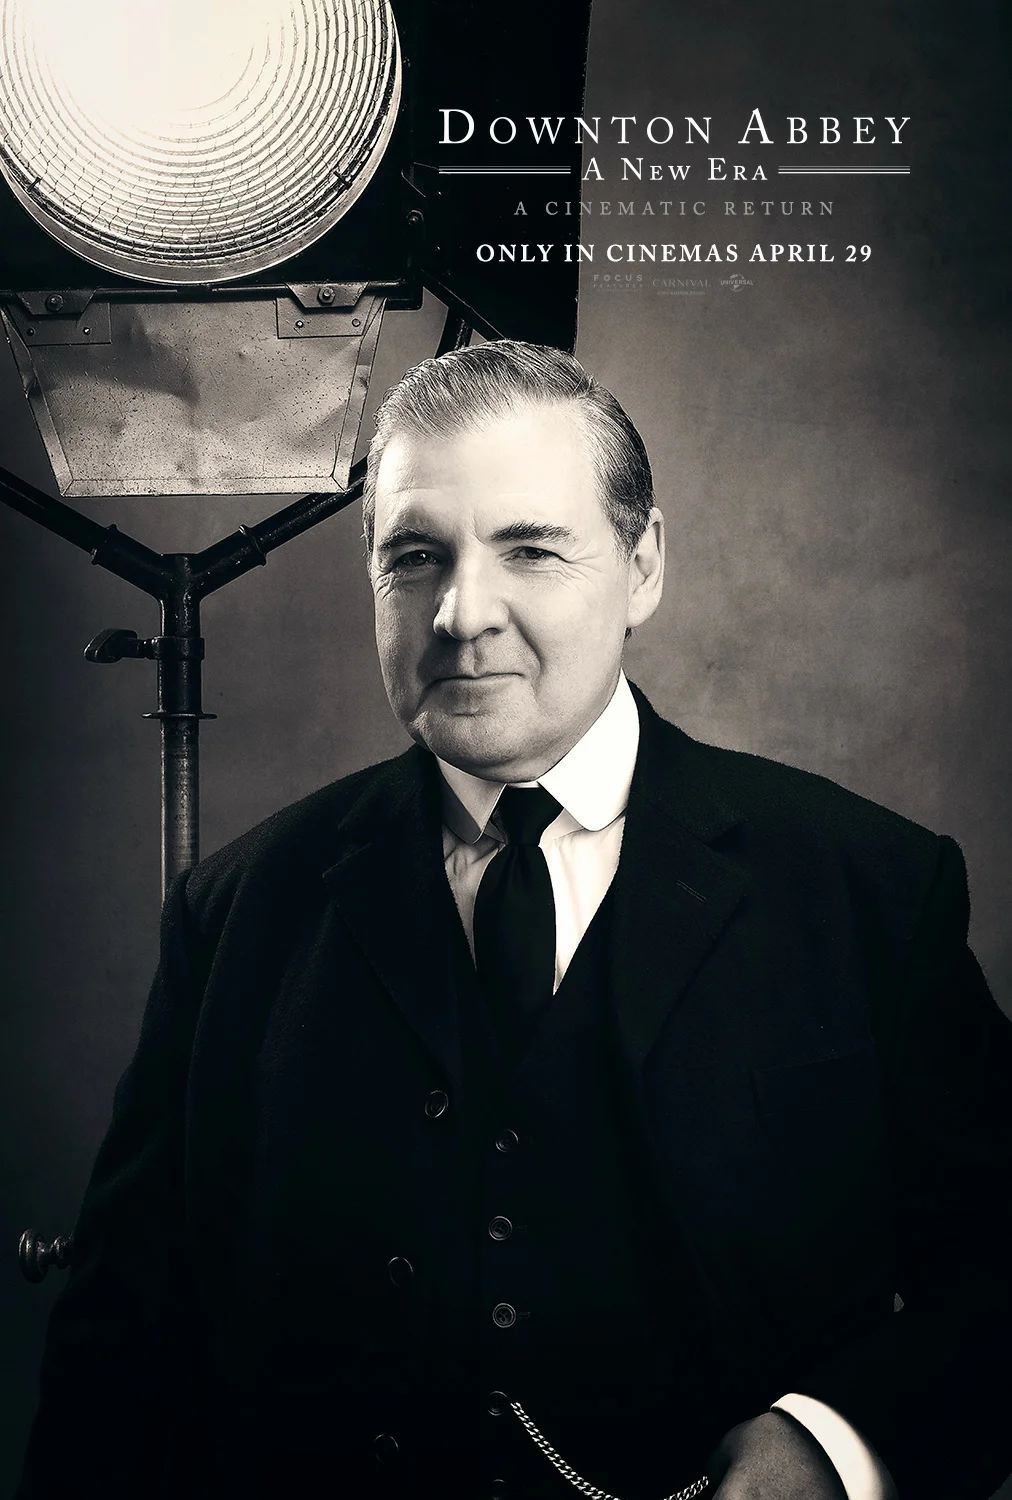 downton-abbey-a-new-era-released-character-posters-multiple-main-actors-appear-13